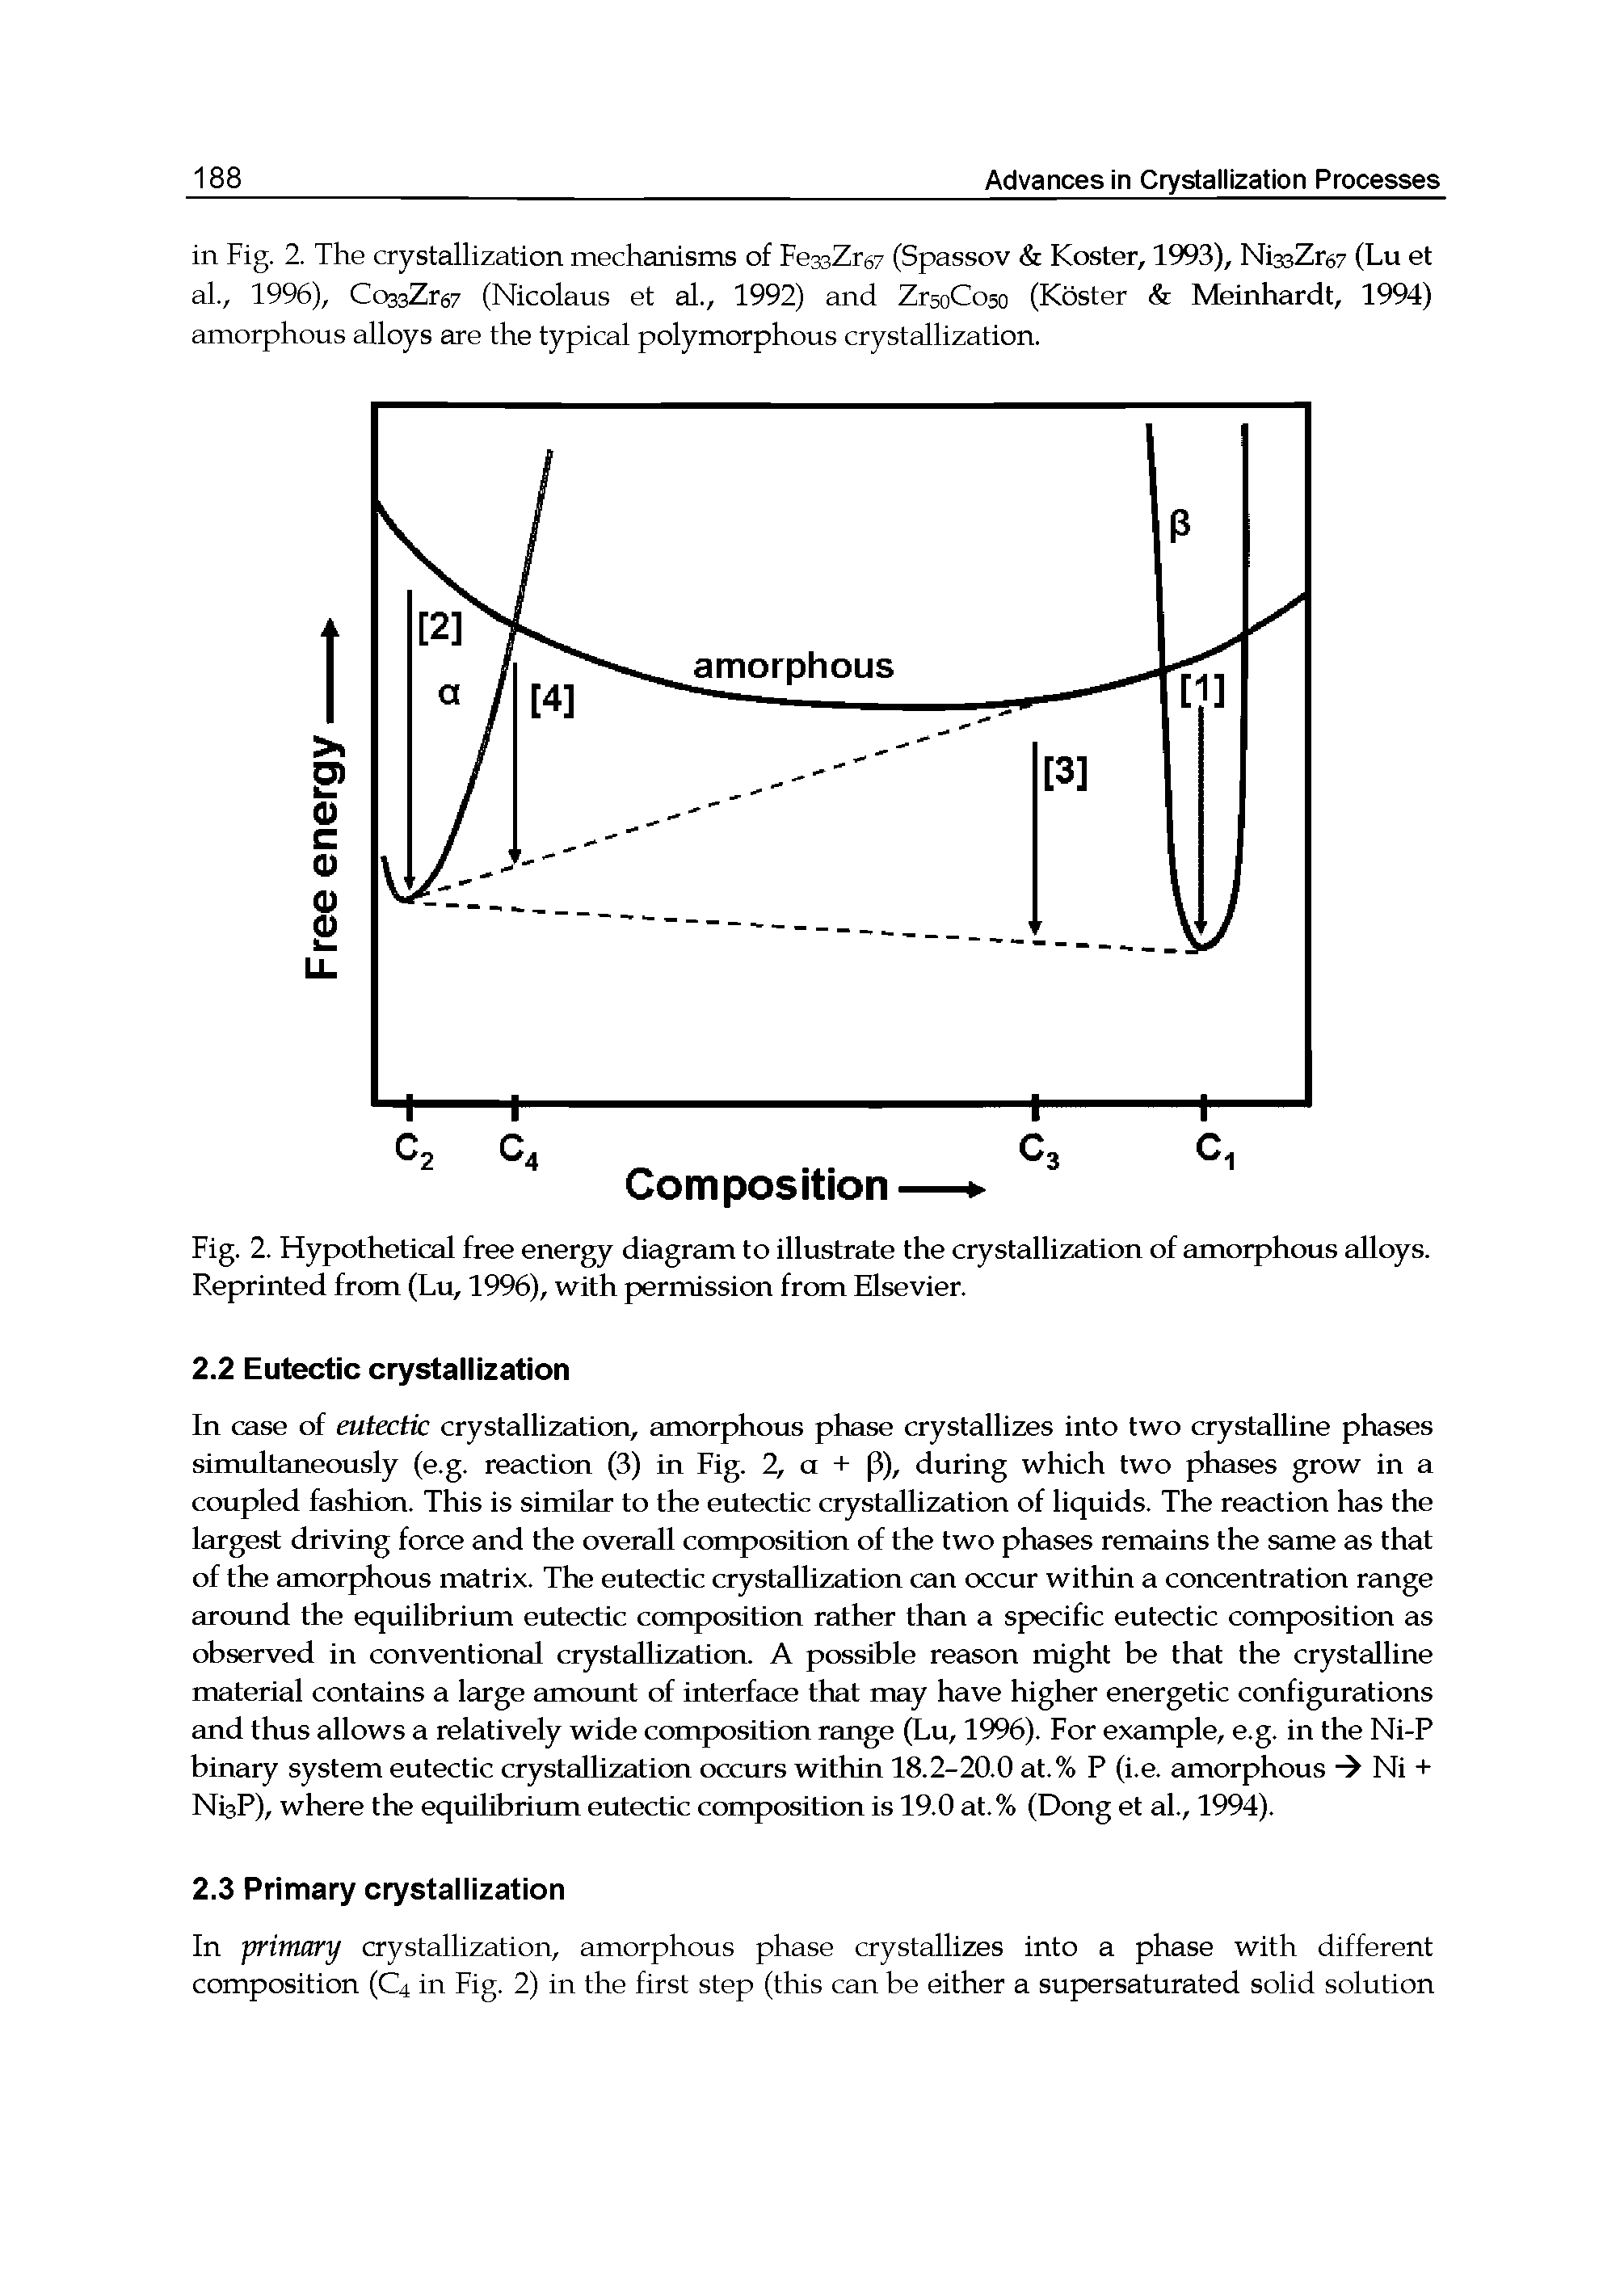 Fig. 2. Hypothetical free energy diagram to illustrate the crystallization of amorphous alloys. Reprinted from (Lu, 1996), with permission from Elsevier.